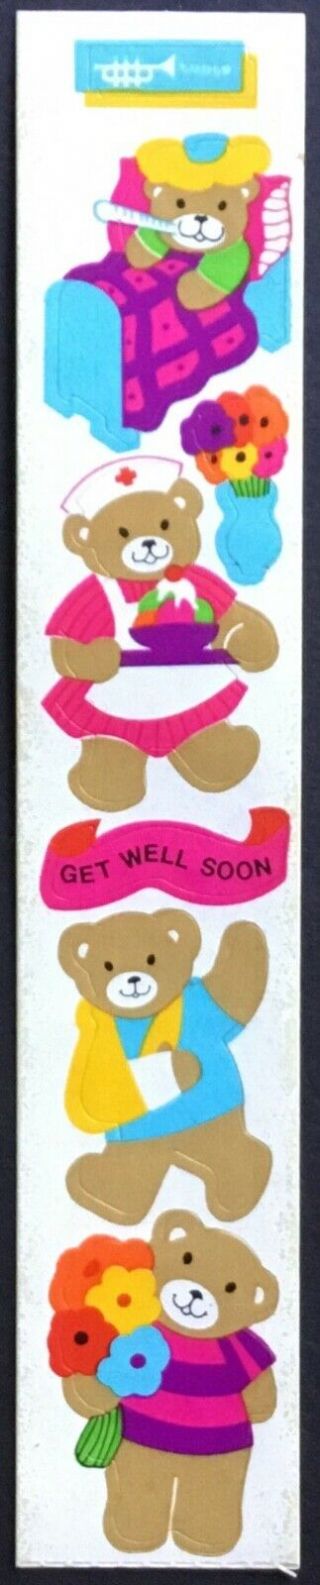 Vintage Stickers - Cardesign - Toots - Get Well Bears - Dated 1984